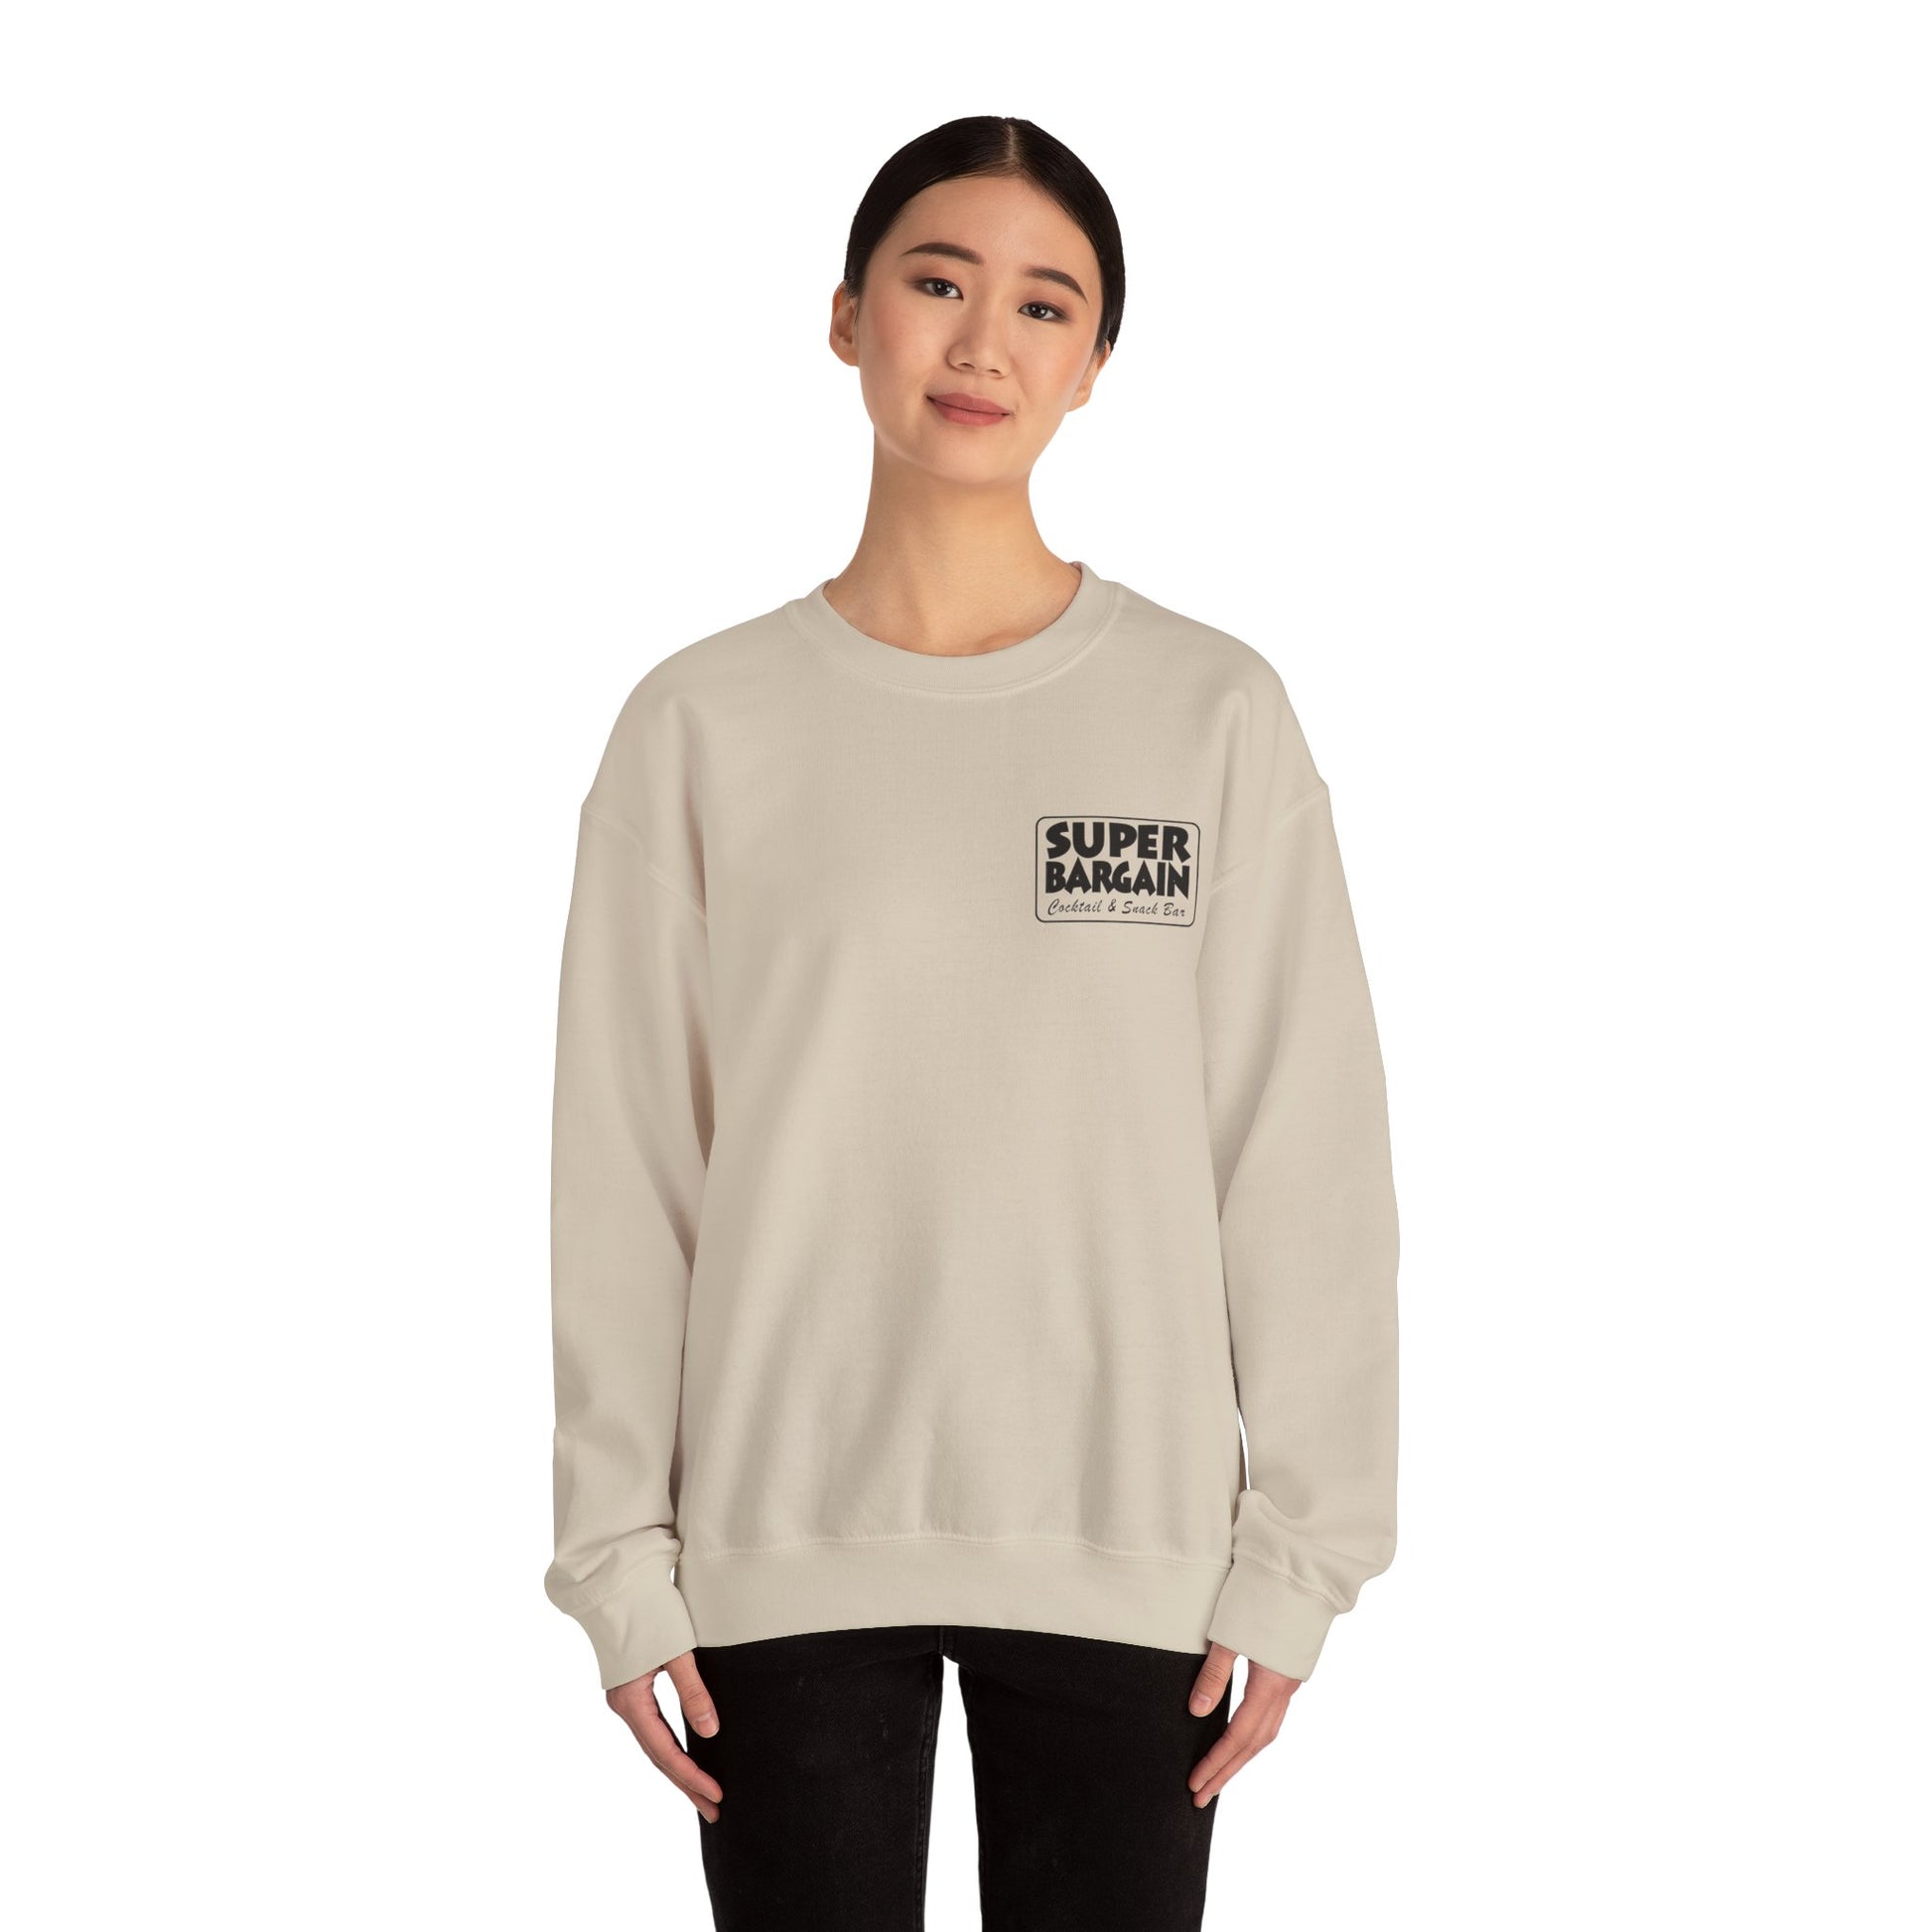 A woman stands straight, wearing a Printify Unisex Heavy Blend™ Crewneck Monochrome Logo and Cabbagetown sweatshirt with the text “SUPER BARGAIN” printed on the front, paired with black pants, against a white background in Toronto.